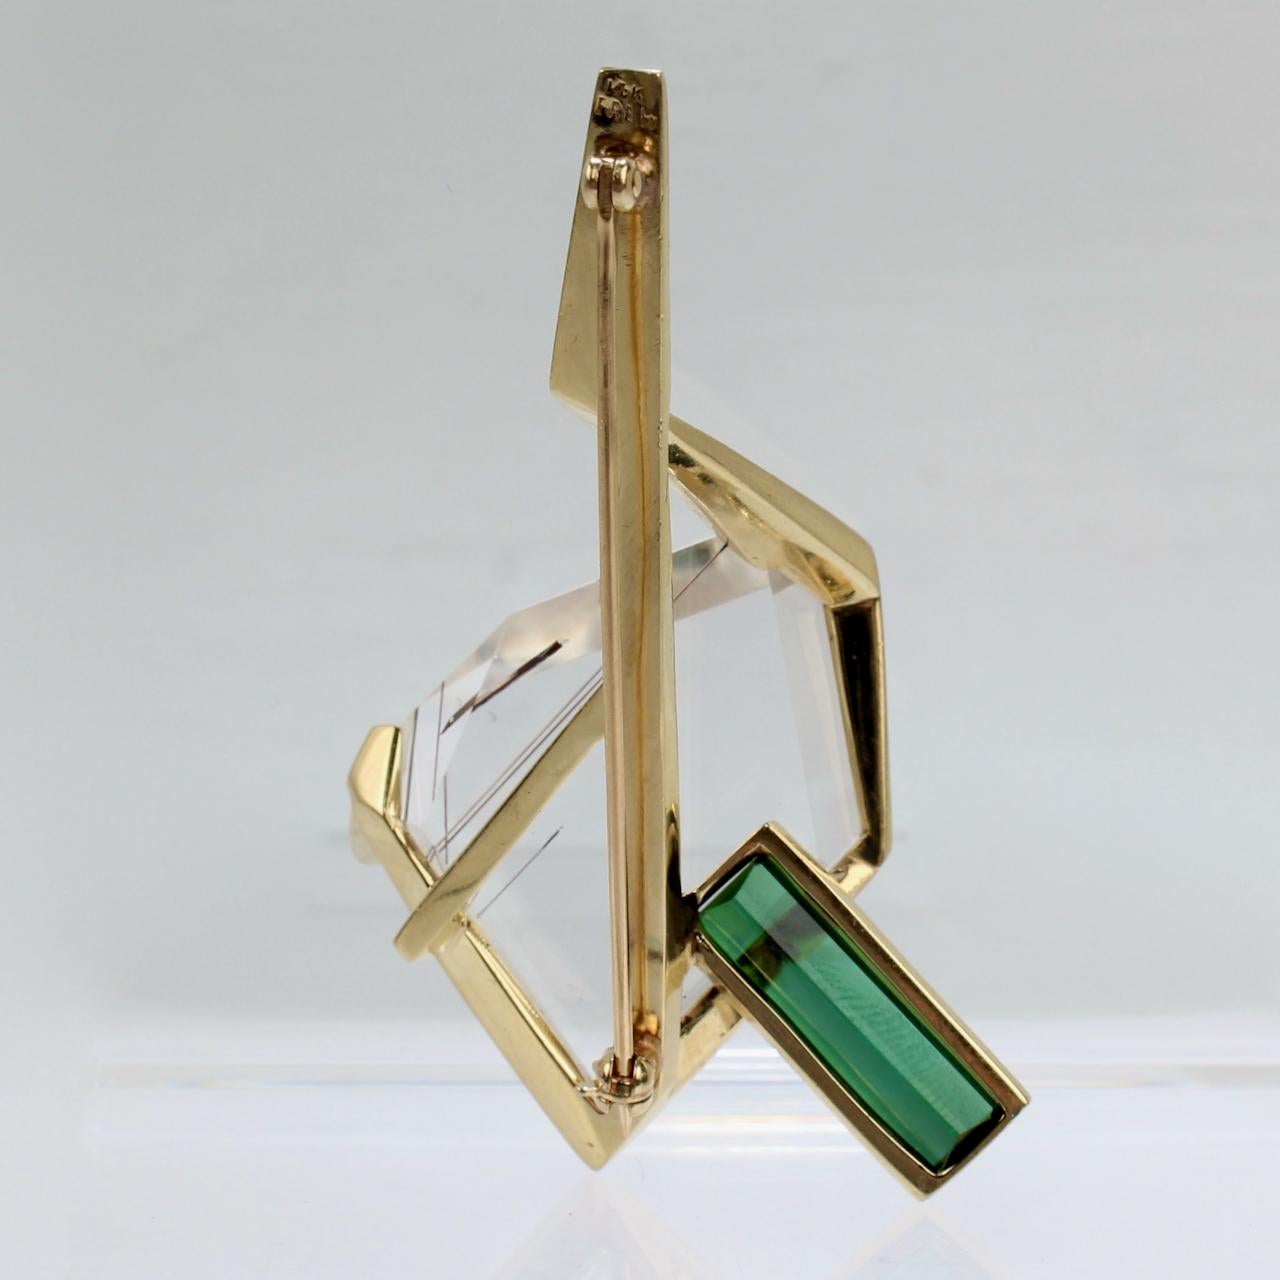 J. Arnold Frew Modernist 14 Karat Gold, Tourmaline, and Rutilated Quartz Brooch In Good Condition For Sale In Philadelphia, PA